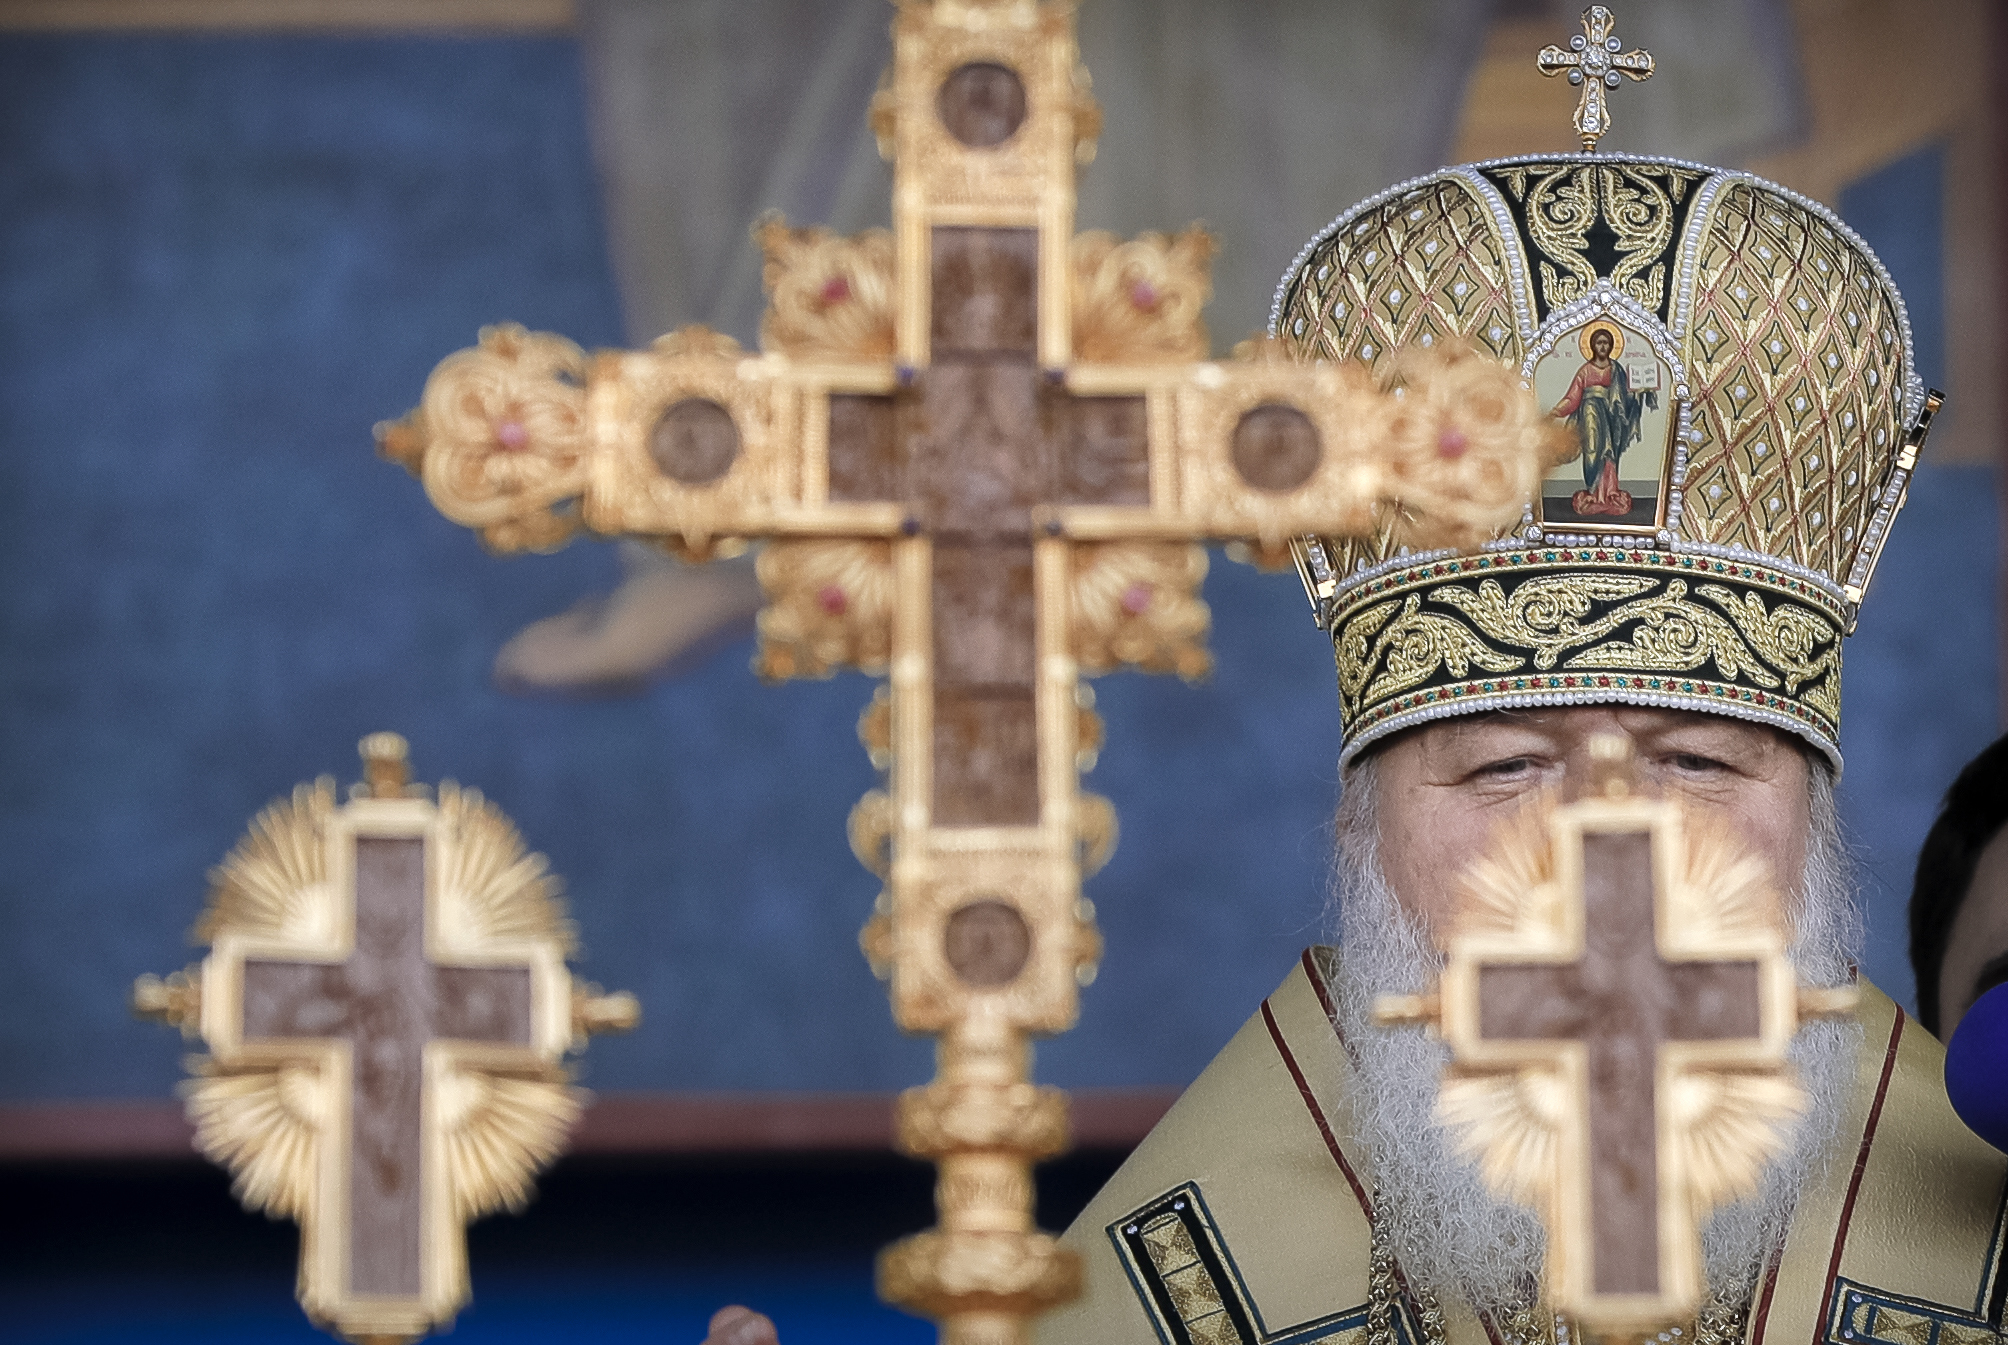 The head of the Russian Orthodox Church Patriarch Kirill takes part in a religious service in Bucharest, Romania, Friday, Oct. 27, 2017. Russian Orthodox patriarch of Moscow Kirill is in Romania in the first visit by the head of the powerful Russian church since communism ended. (AP Photo/Vadim Ghirda)